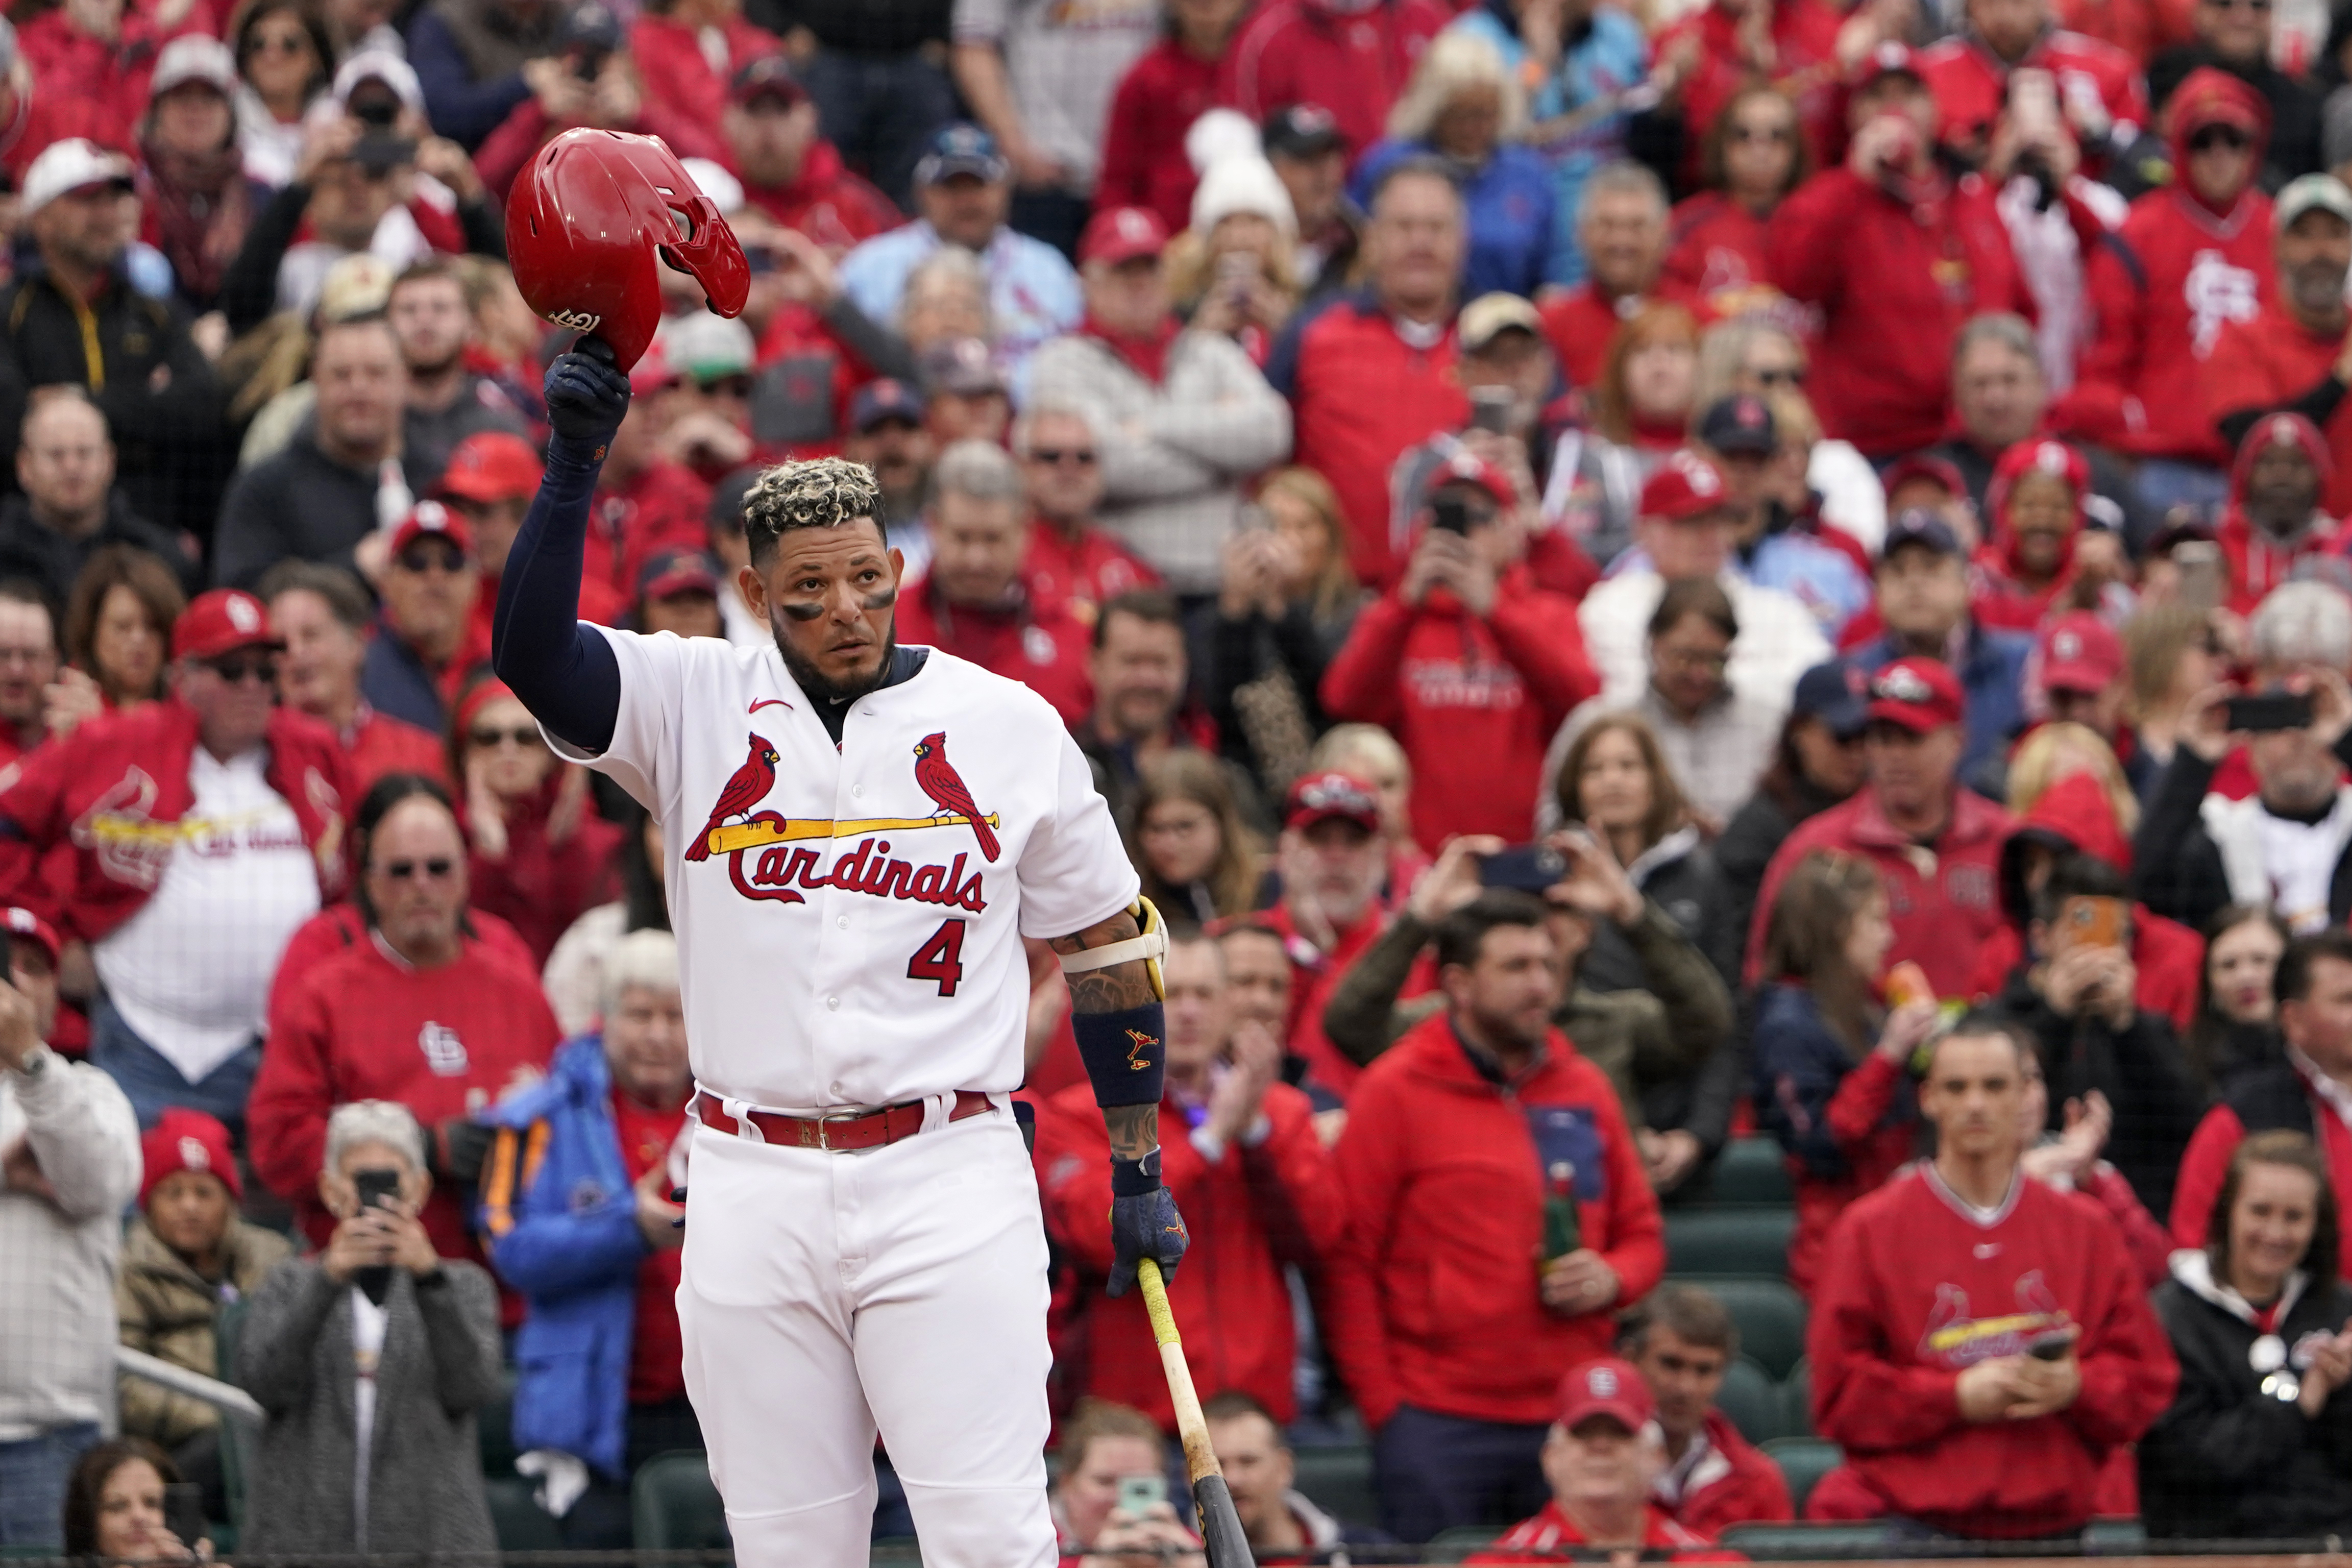 Waino, O'Neill lift Cards over Pirates in Pujols' return